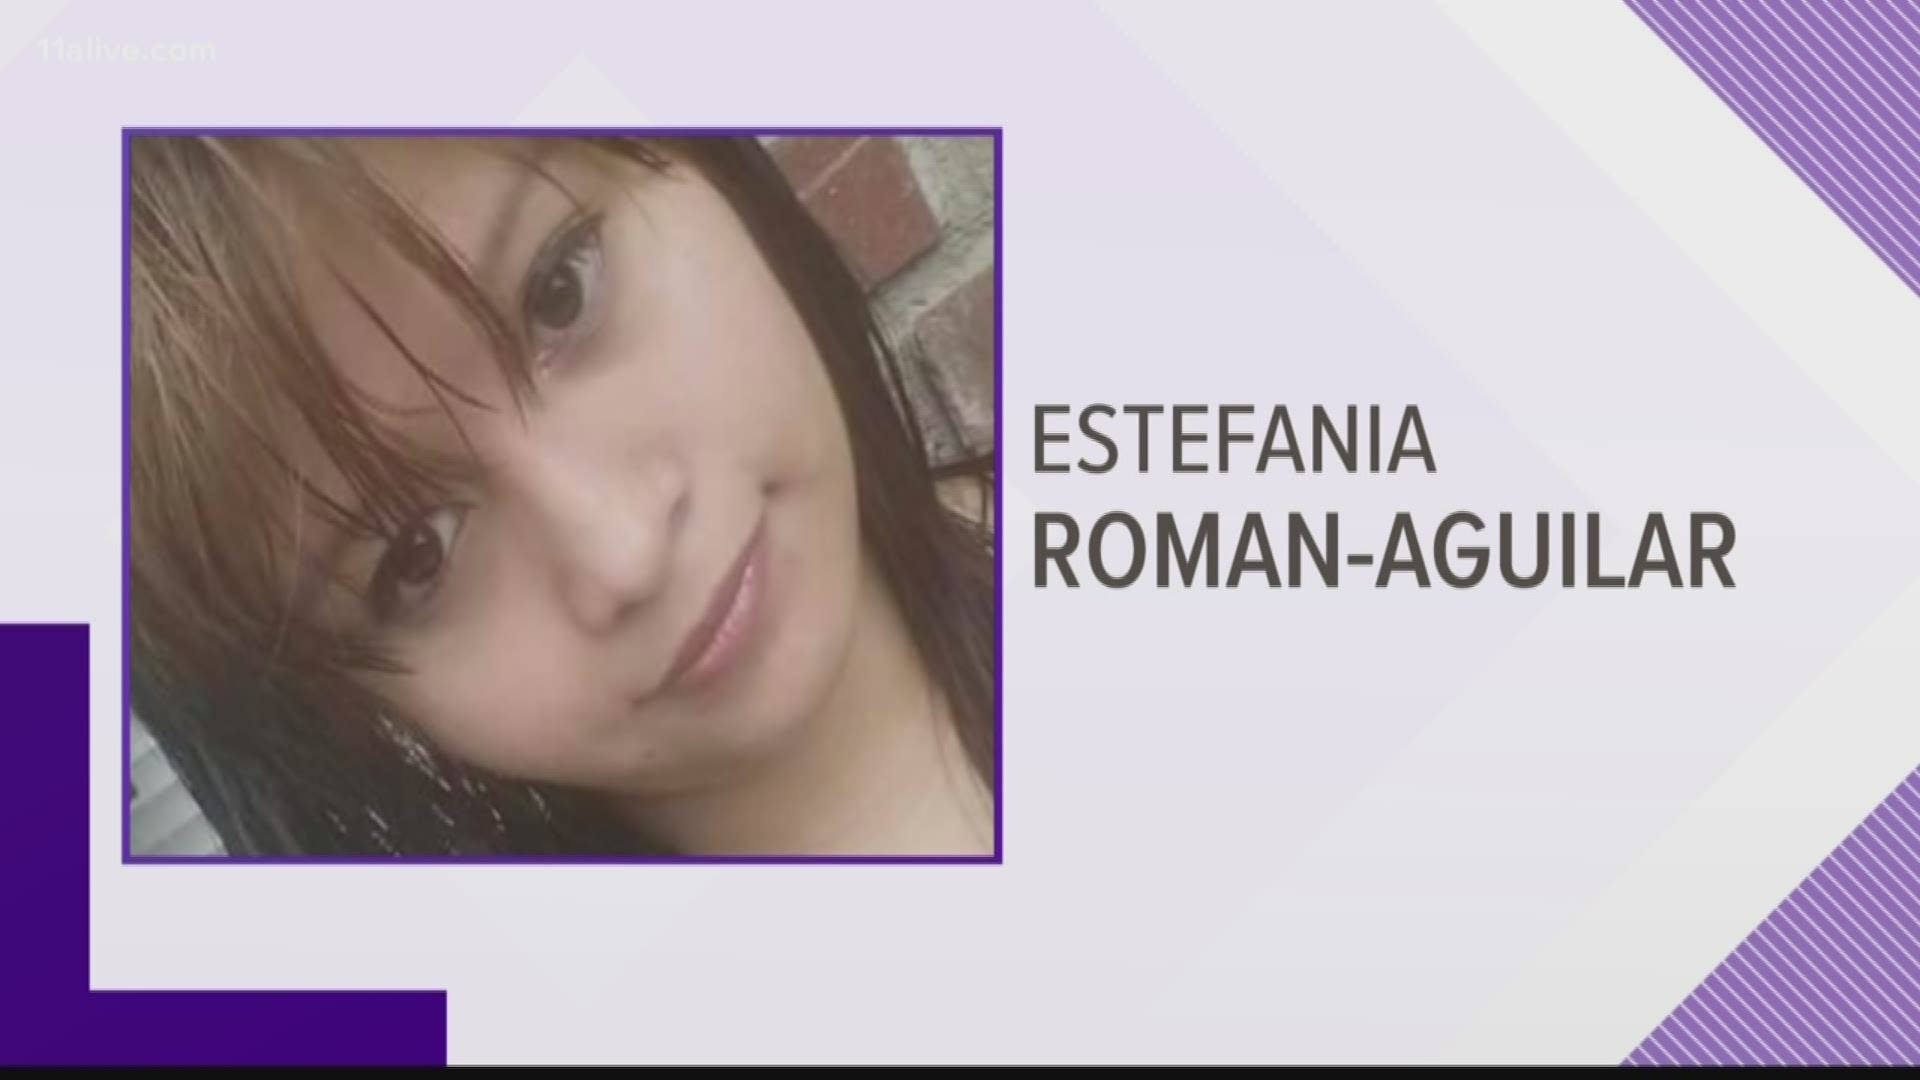 Estefania Roman-Aguilar is wanted for the murder of her 5-month-old daughter in 2016.